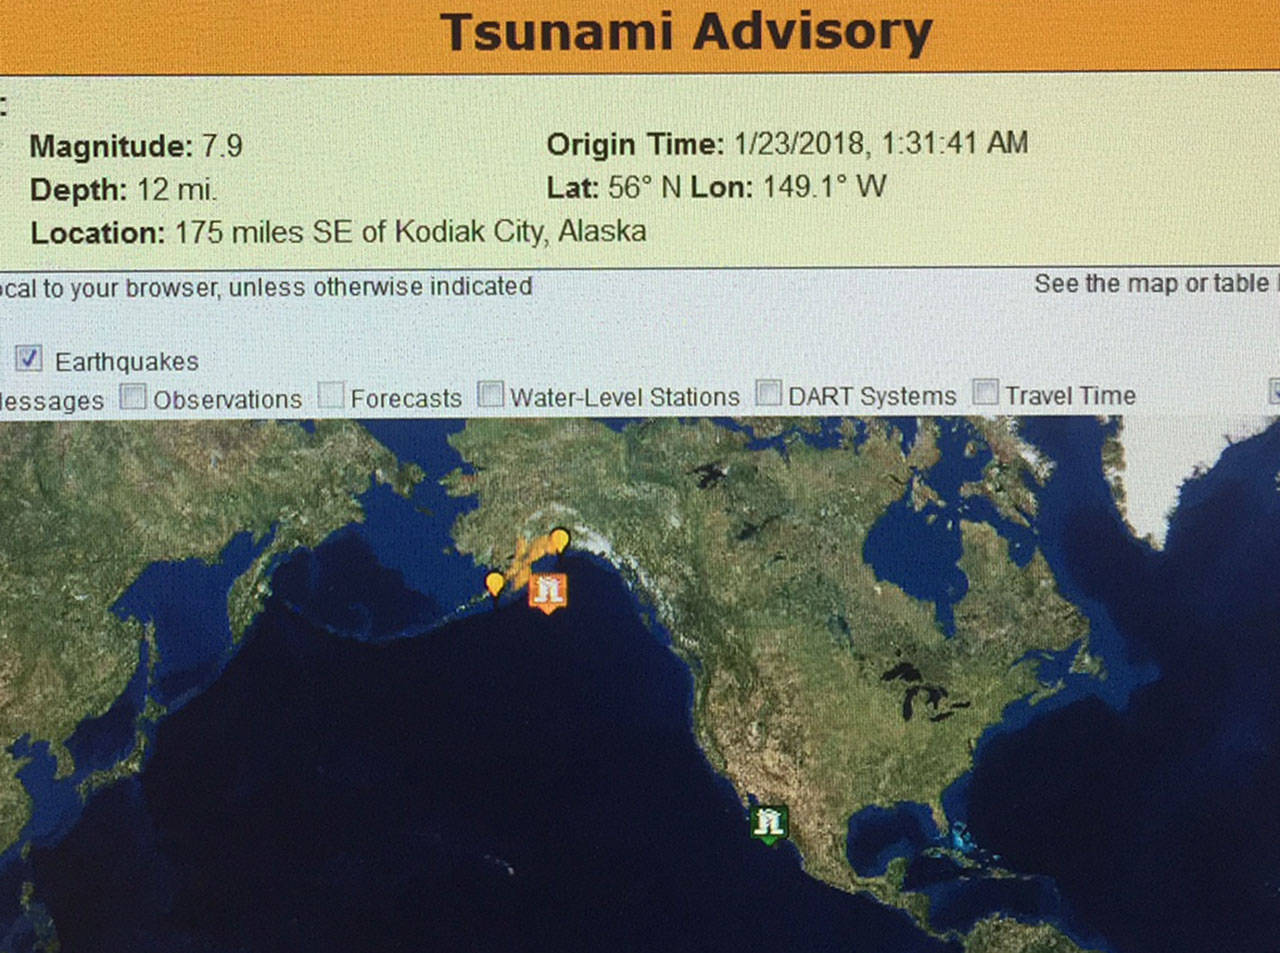 This is the original alert issued by the Tsunami Warning Center of the Alaskan earthquake Tuesday morning.